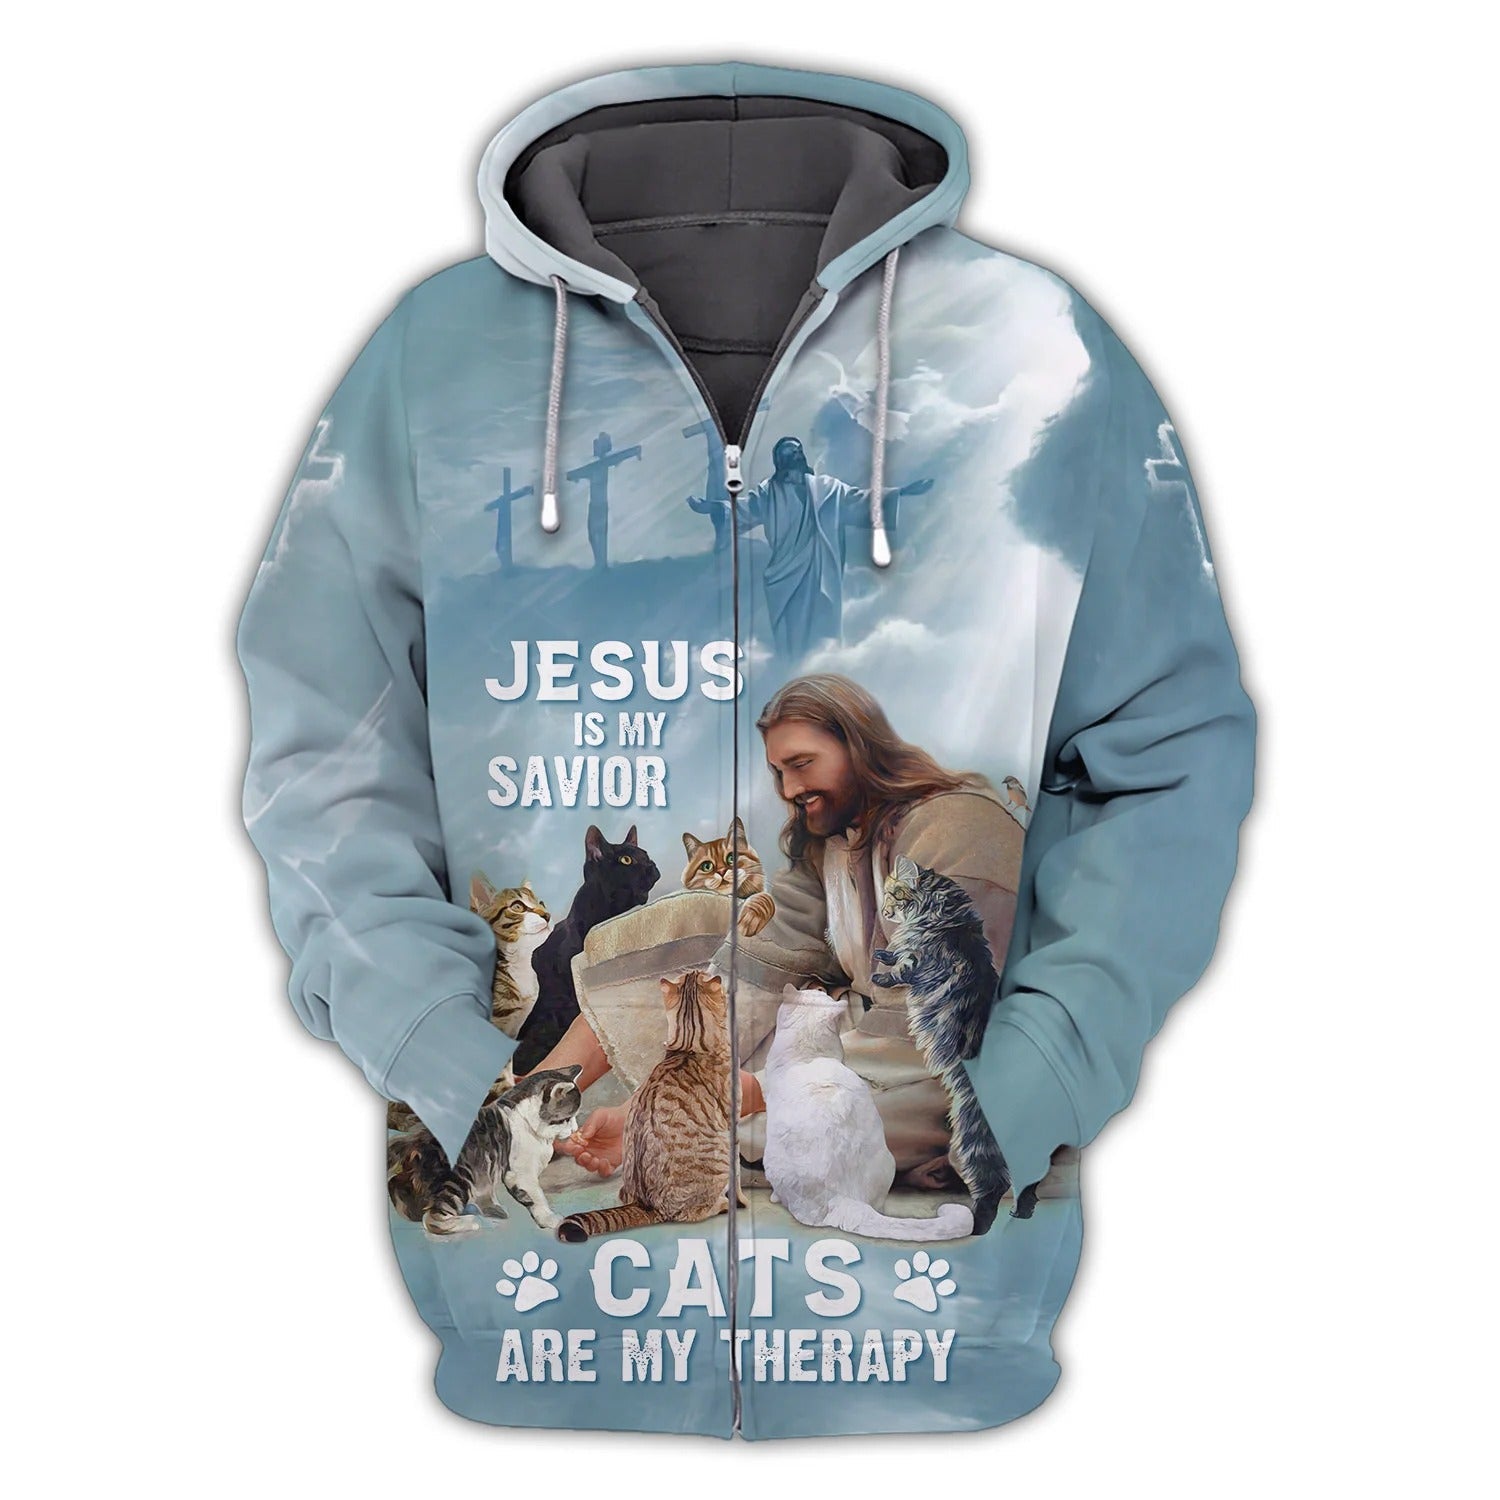 3D All Over Print Cat And Jesus Hoodie/ Jesus Is My Savior/ Cats are My Therapy Sweatshirt/ Cat Tee Shirt